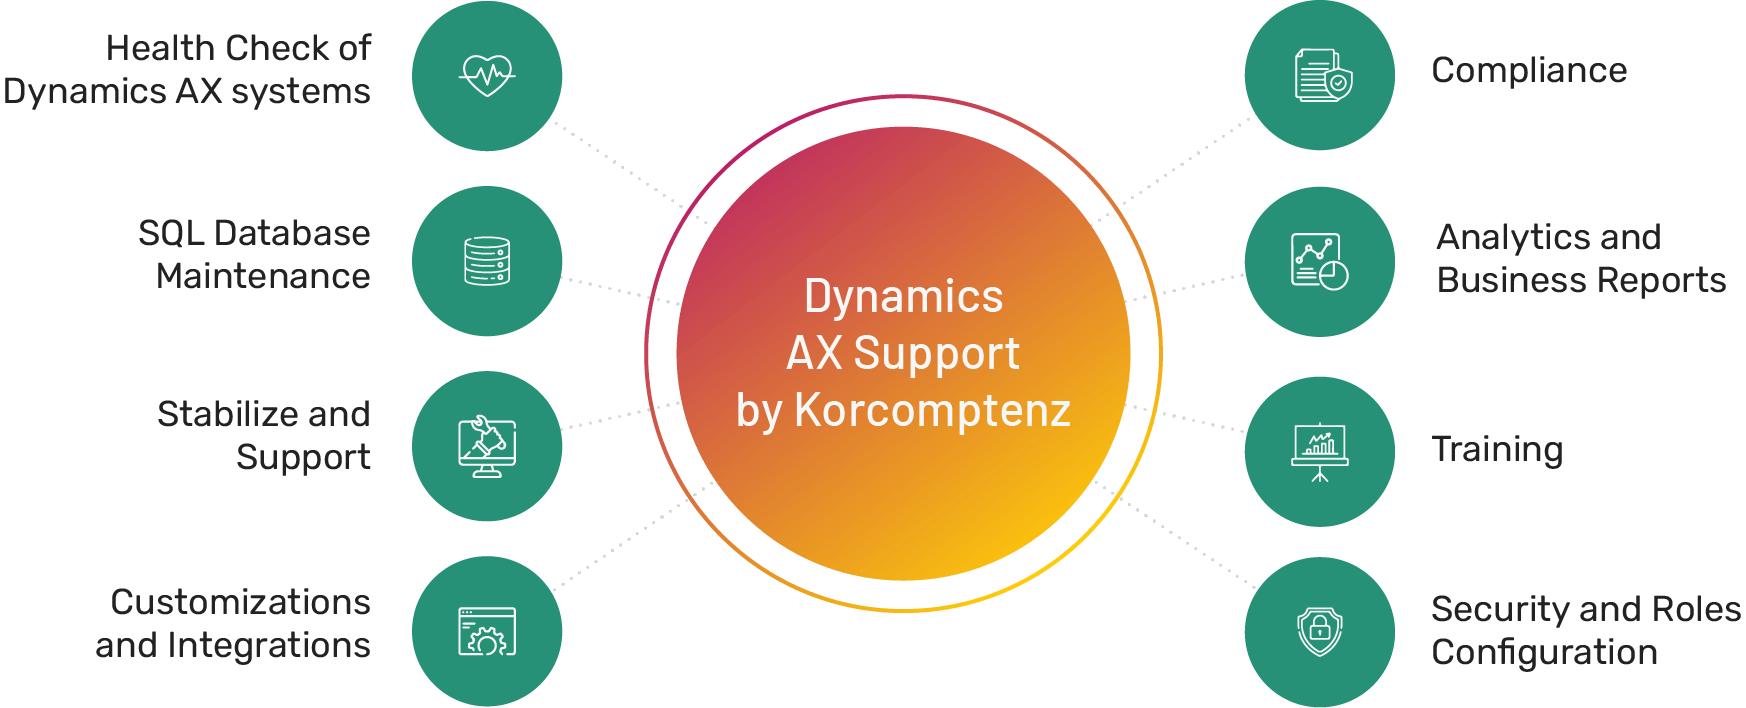 Dynamics AX Support by Korcomptenz